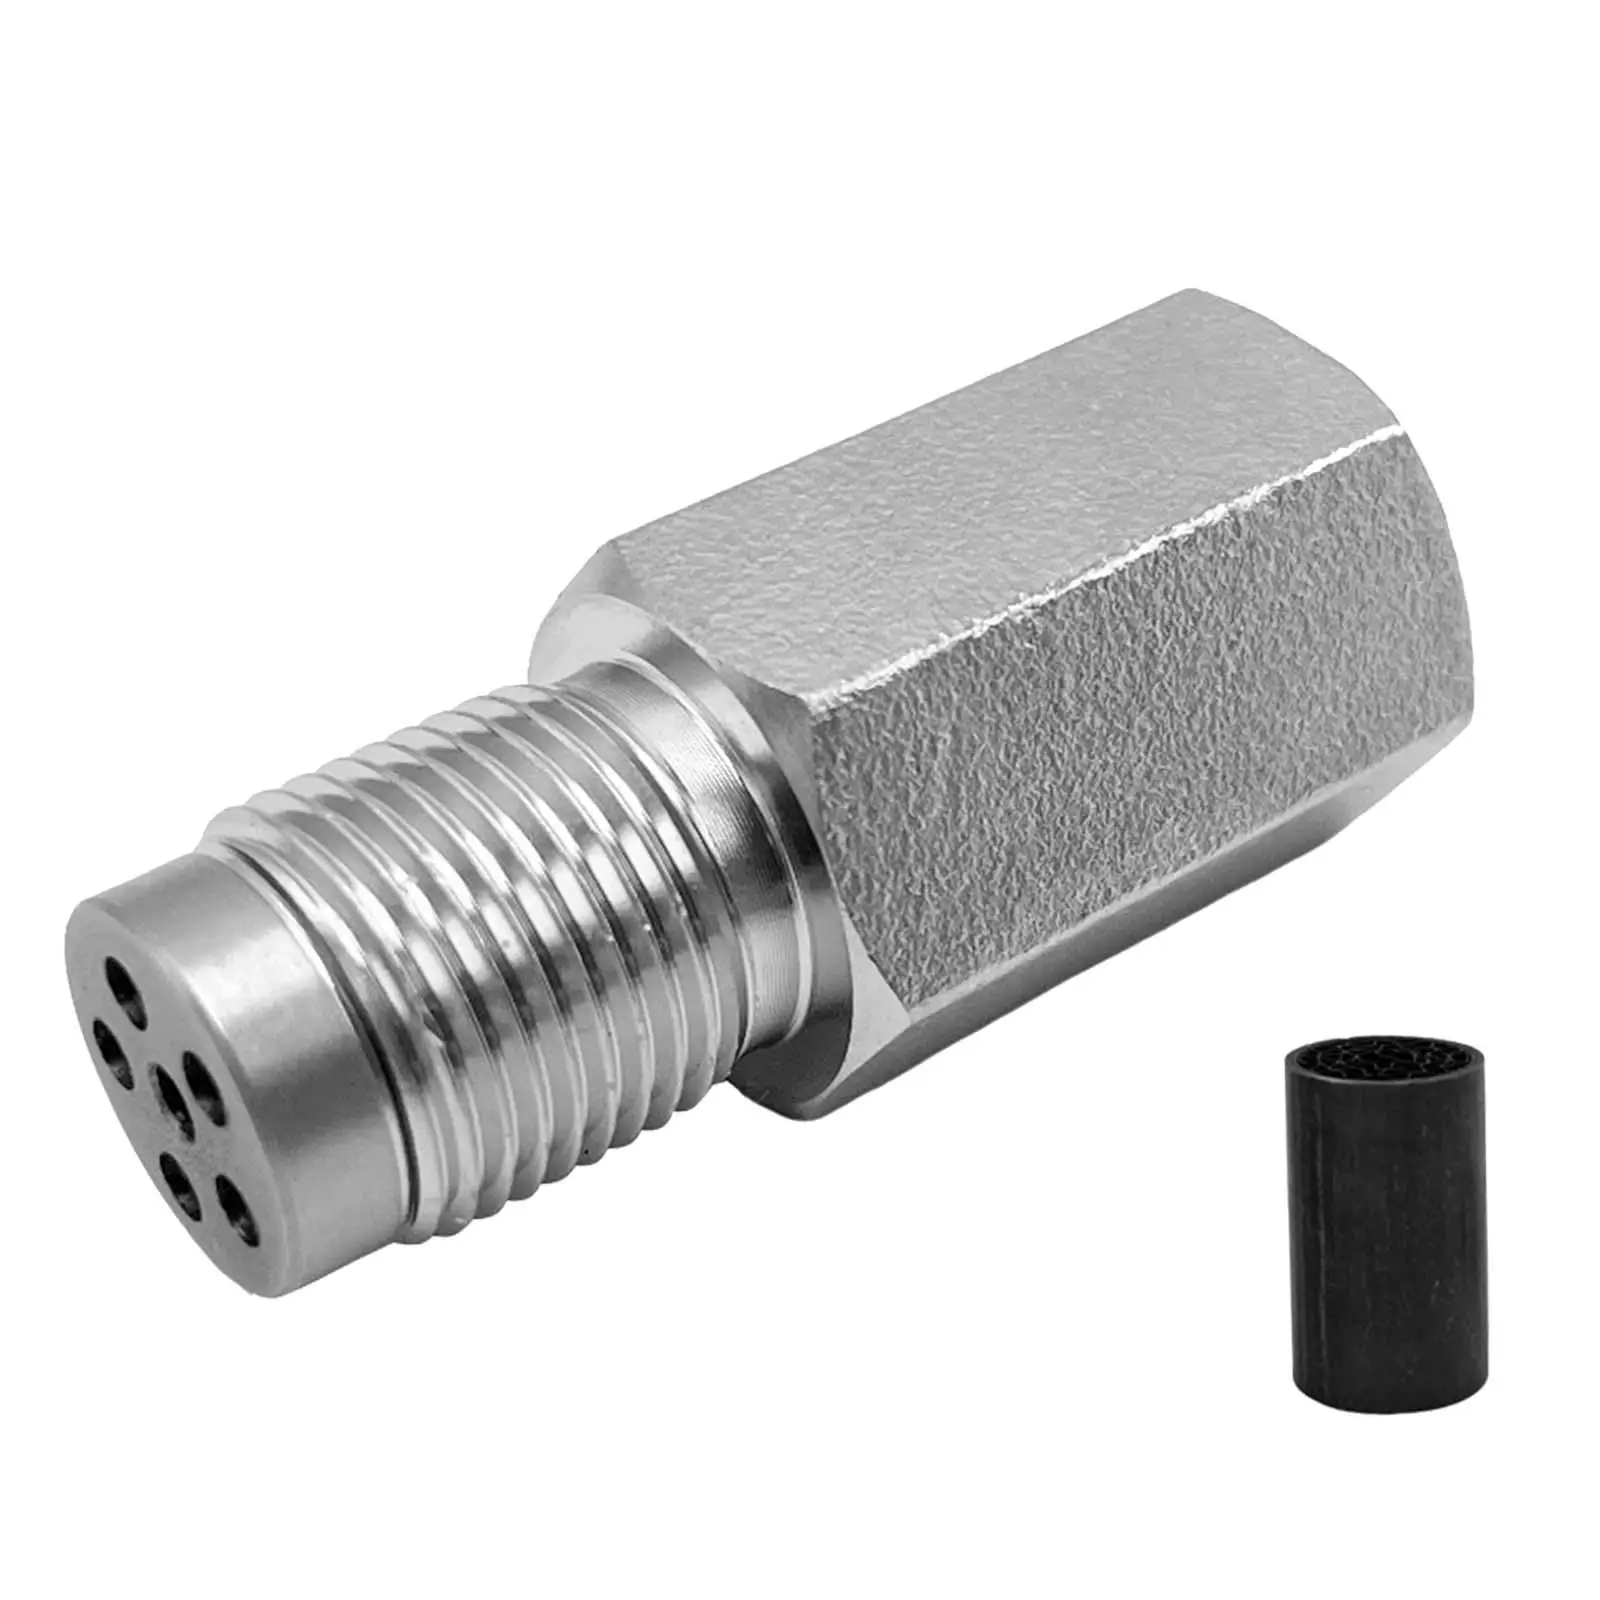 Oxygen Sensor Extender Adapter Works with M18 x 1.5mm Spark Plug Threads for Exhaust Systems Stable Performance